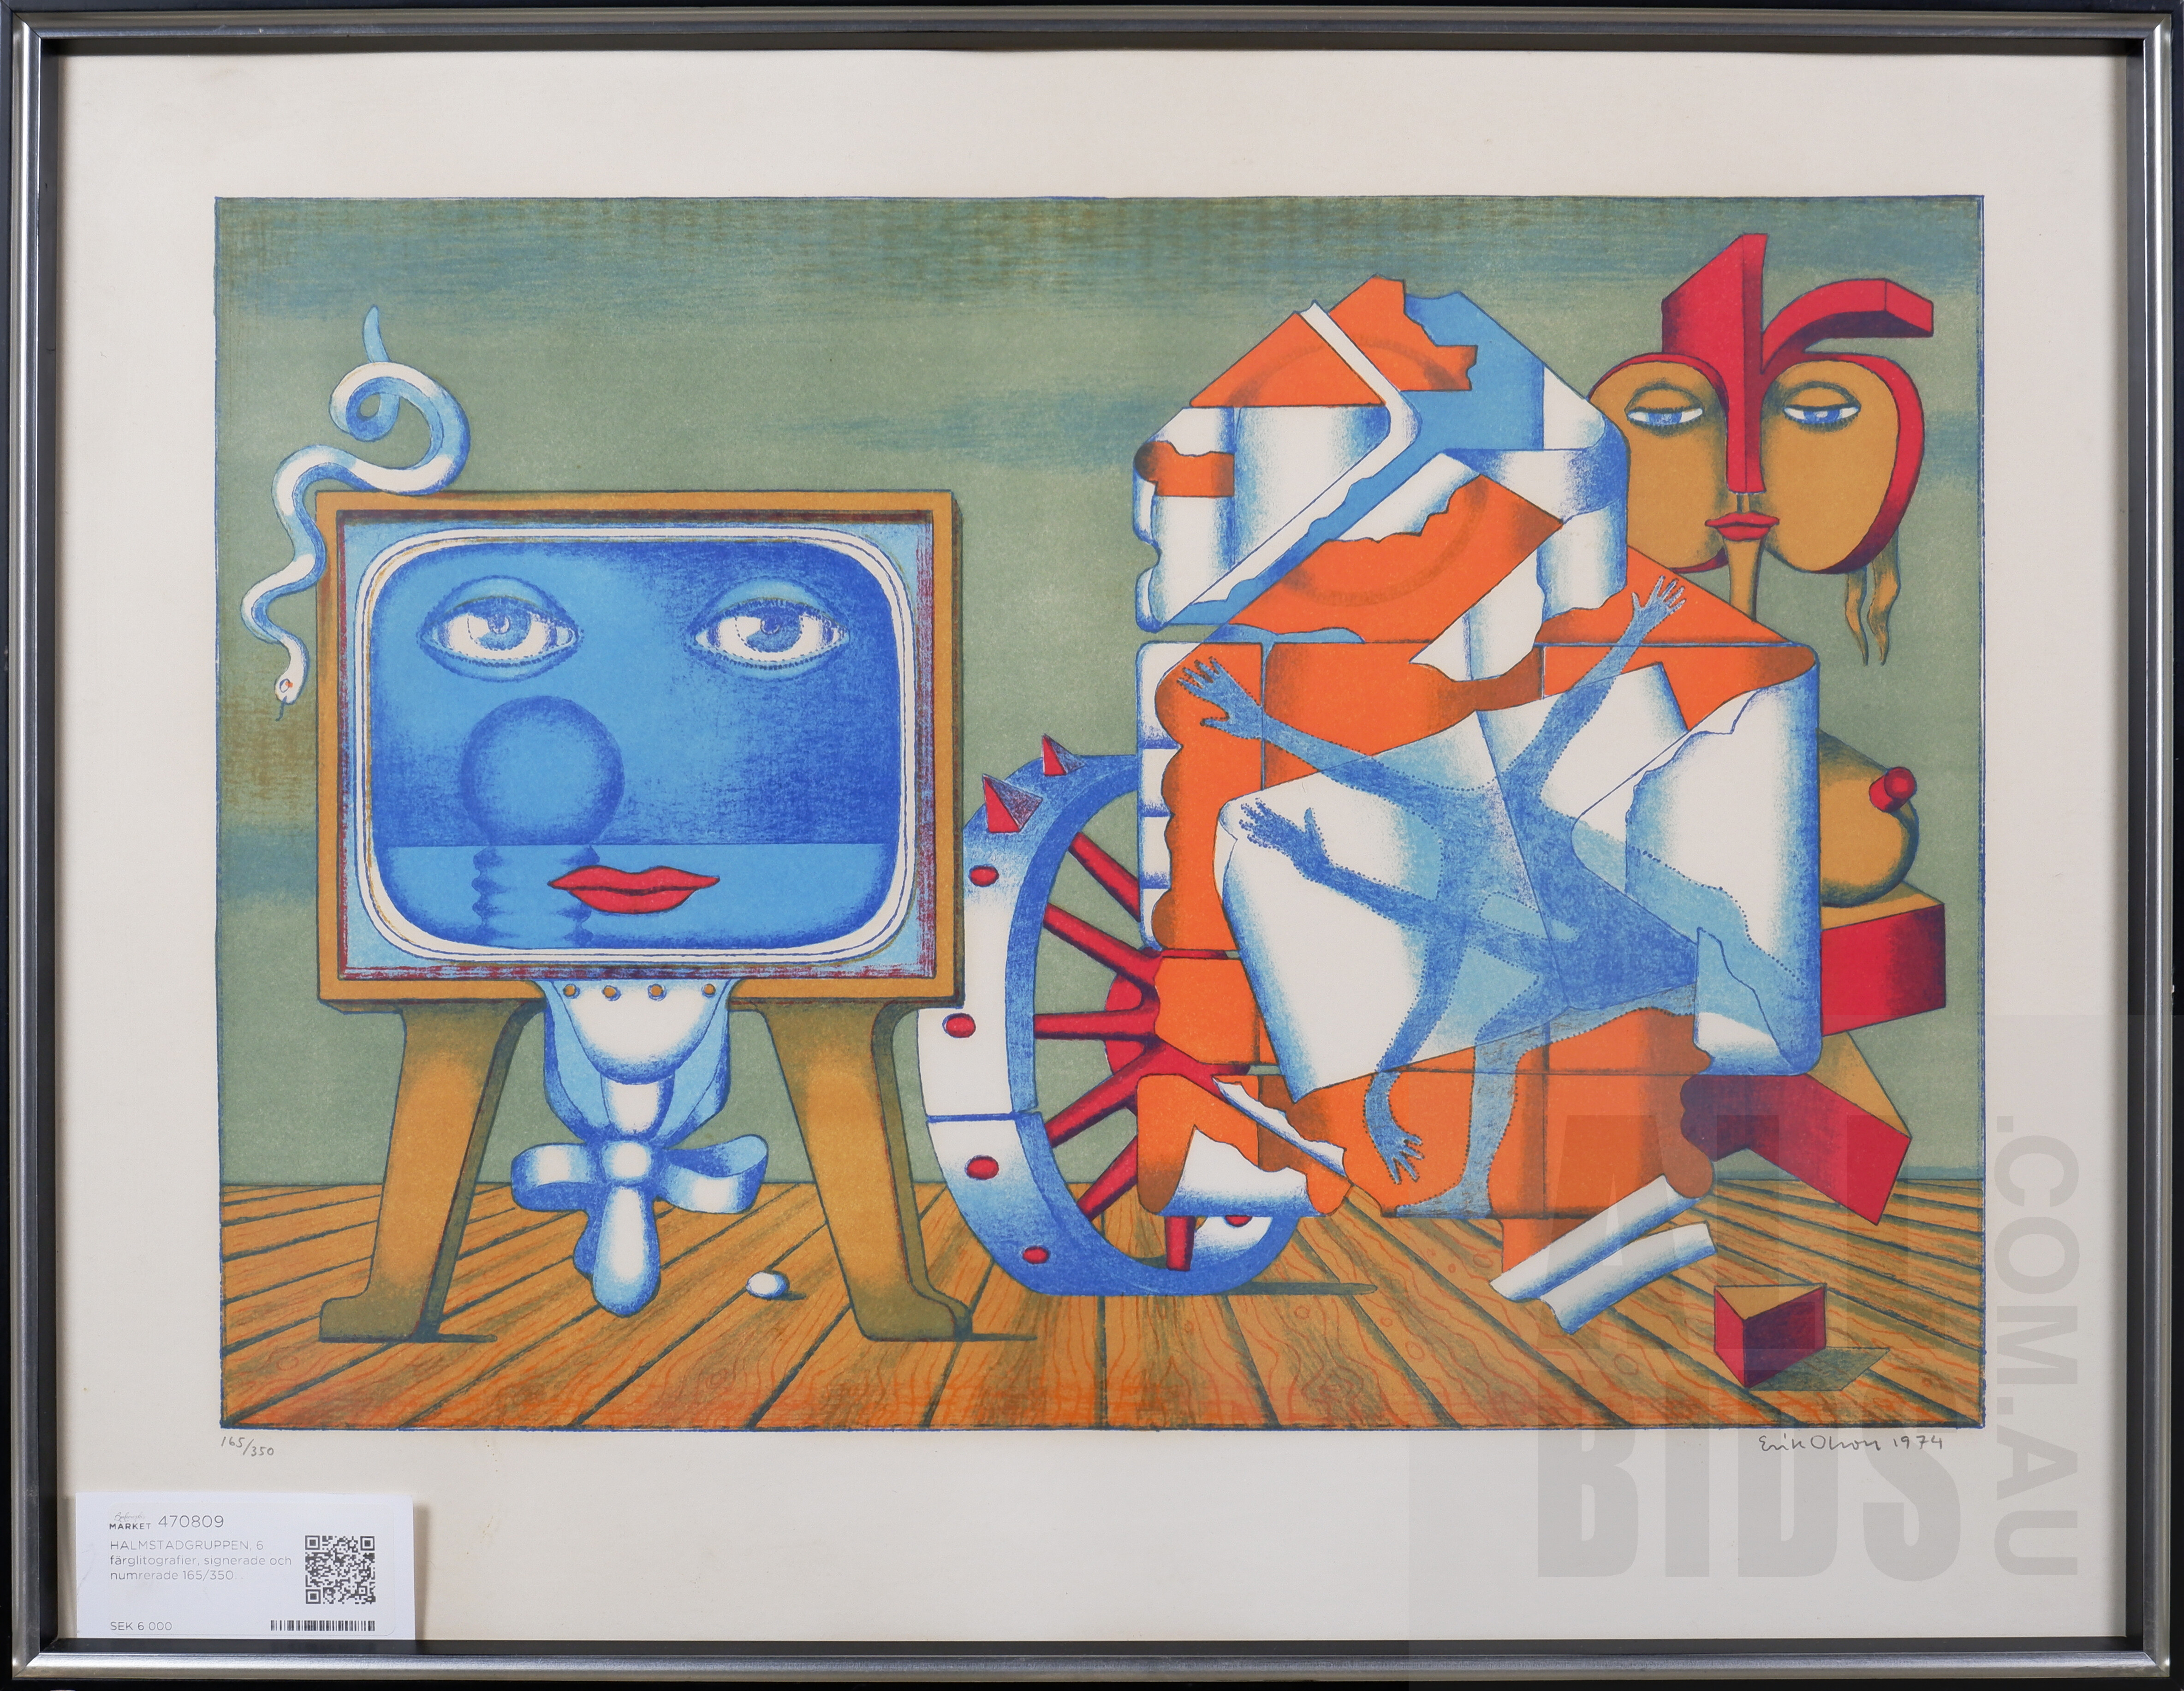 'Erik Olson (1901-1981, Swedish - Halmstad Group), Letter from a Surrealist, Colour Lithograph, 52 x 67cm (incl. frame)'